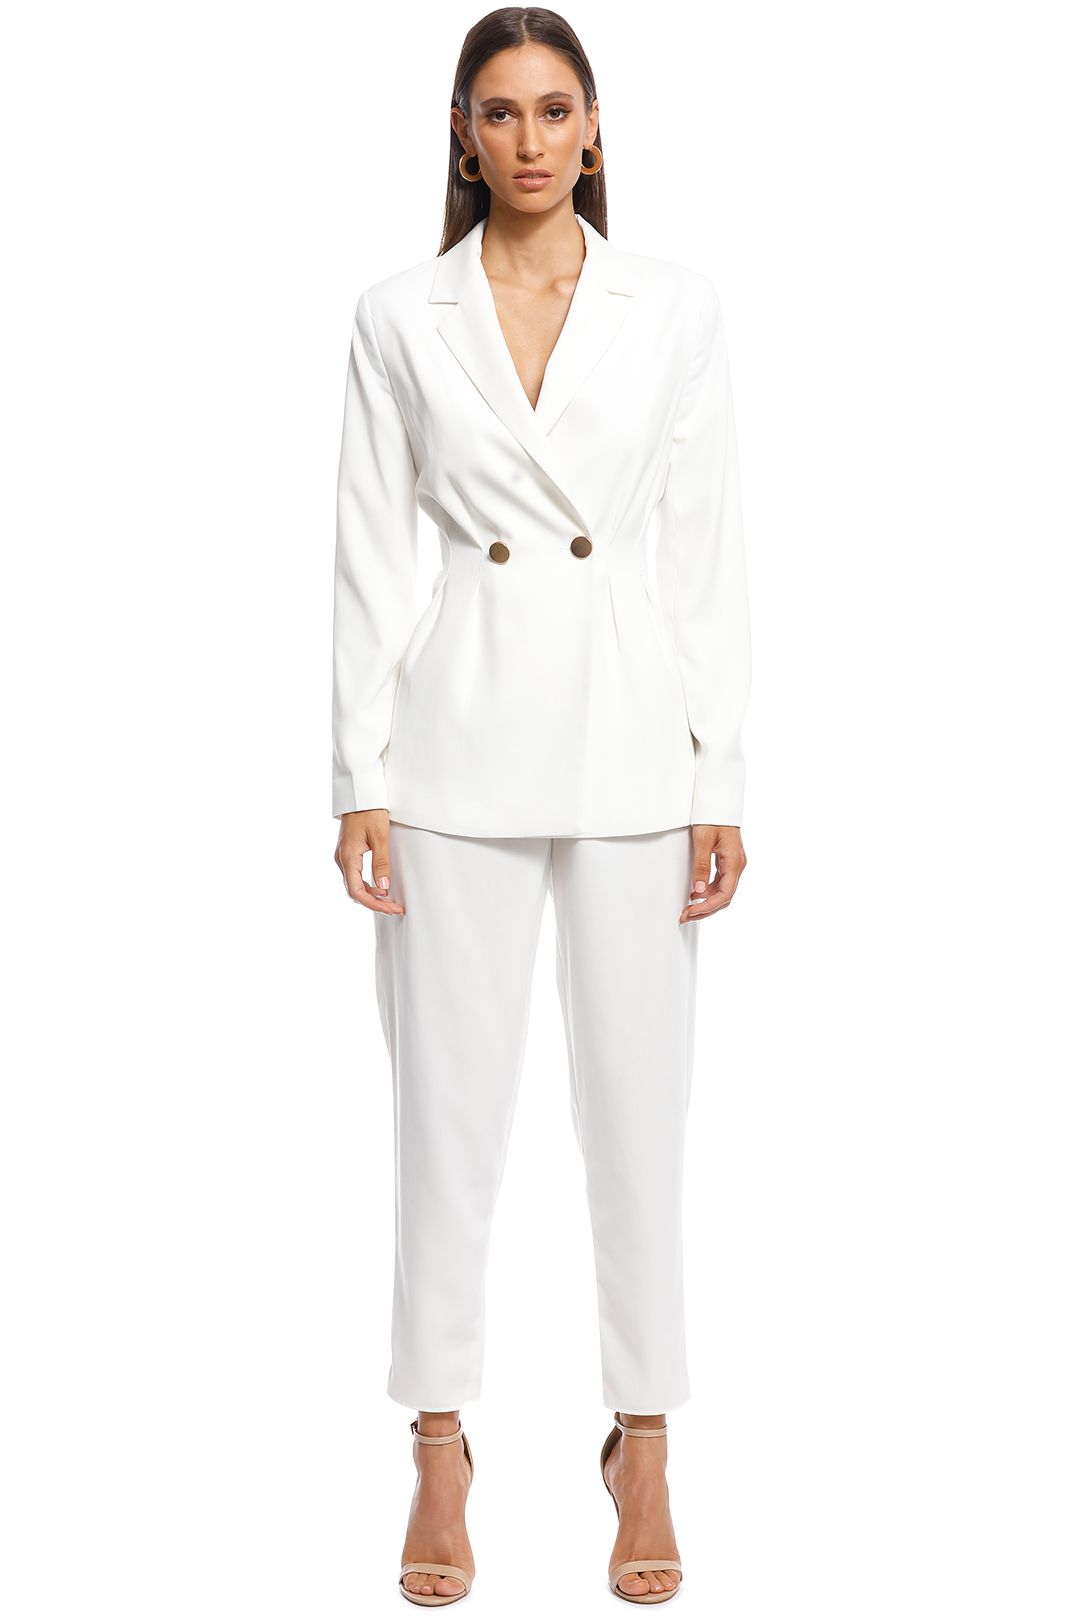 Keepsake the Label - Gone Again Blazer and Pant Set - White - Front